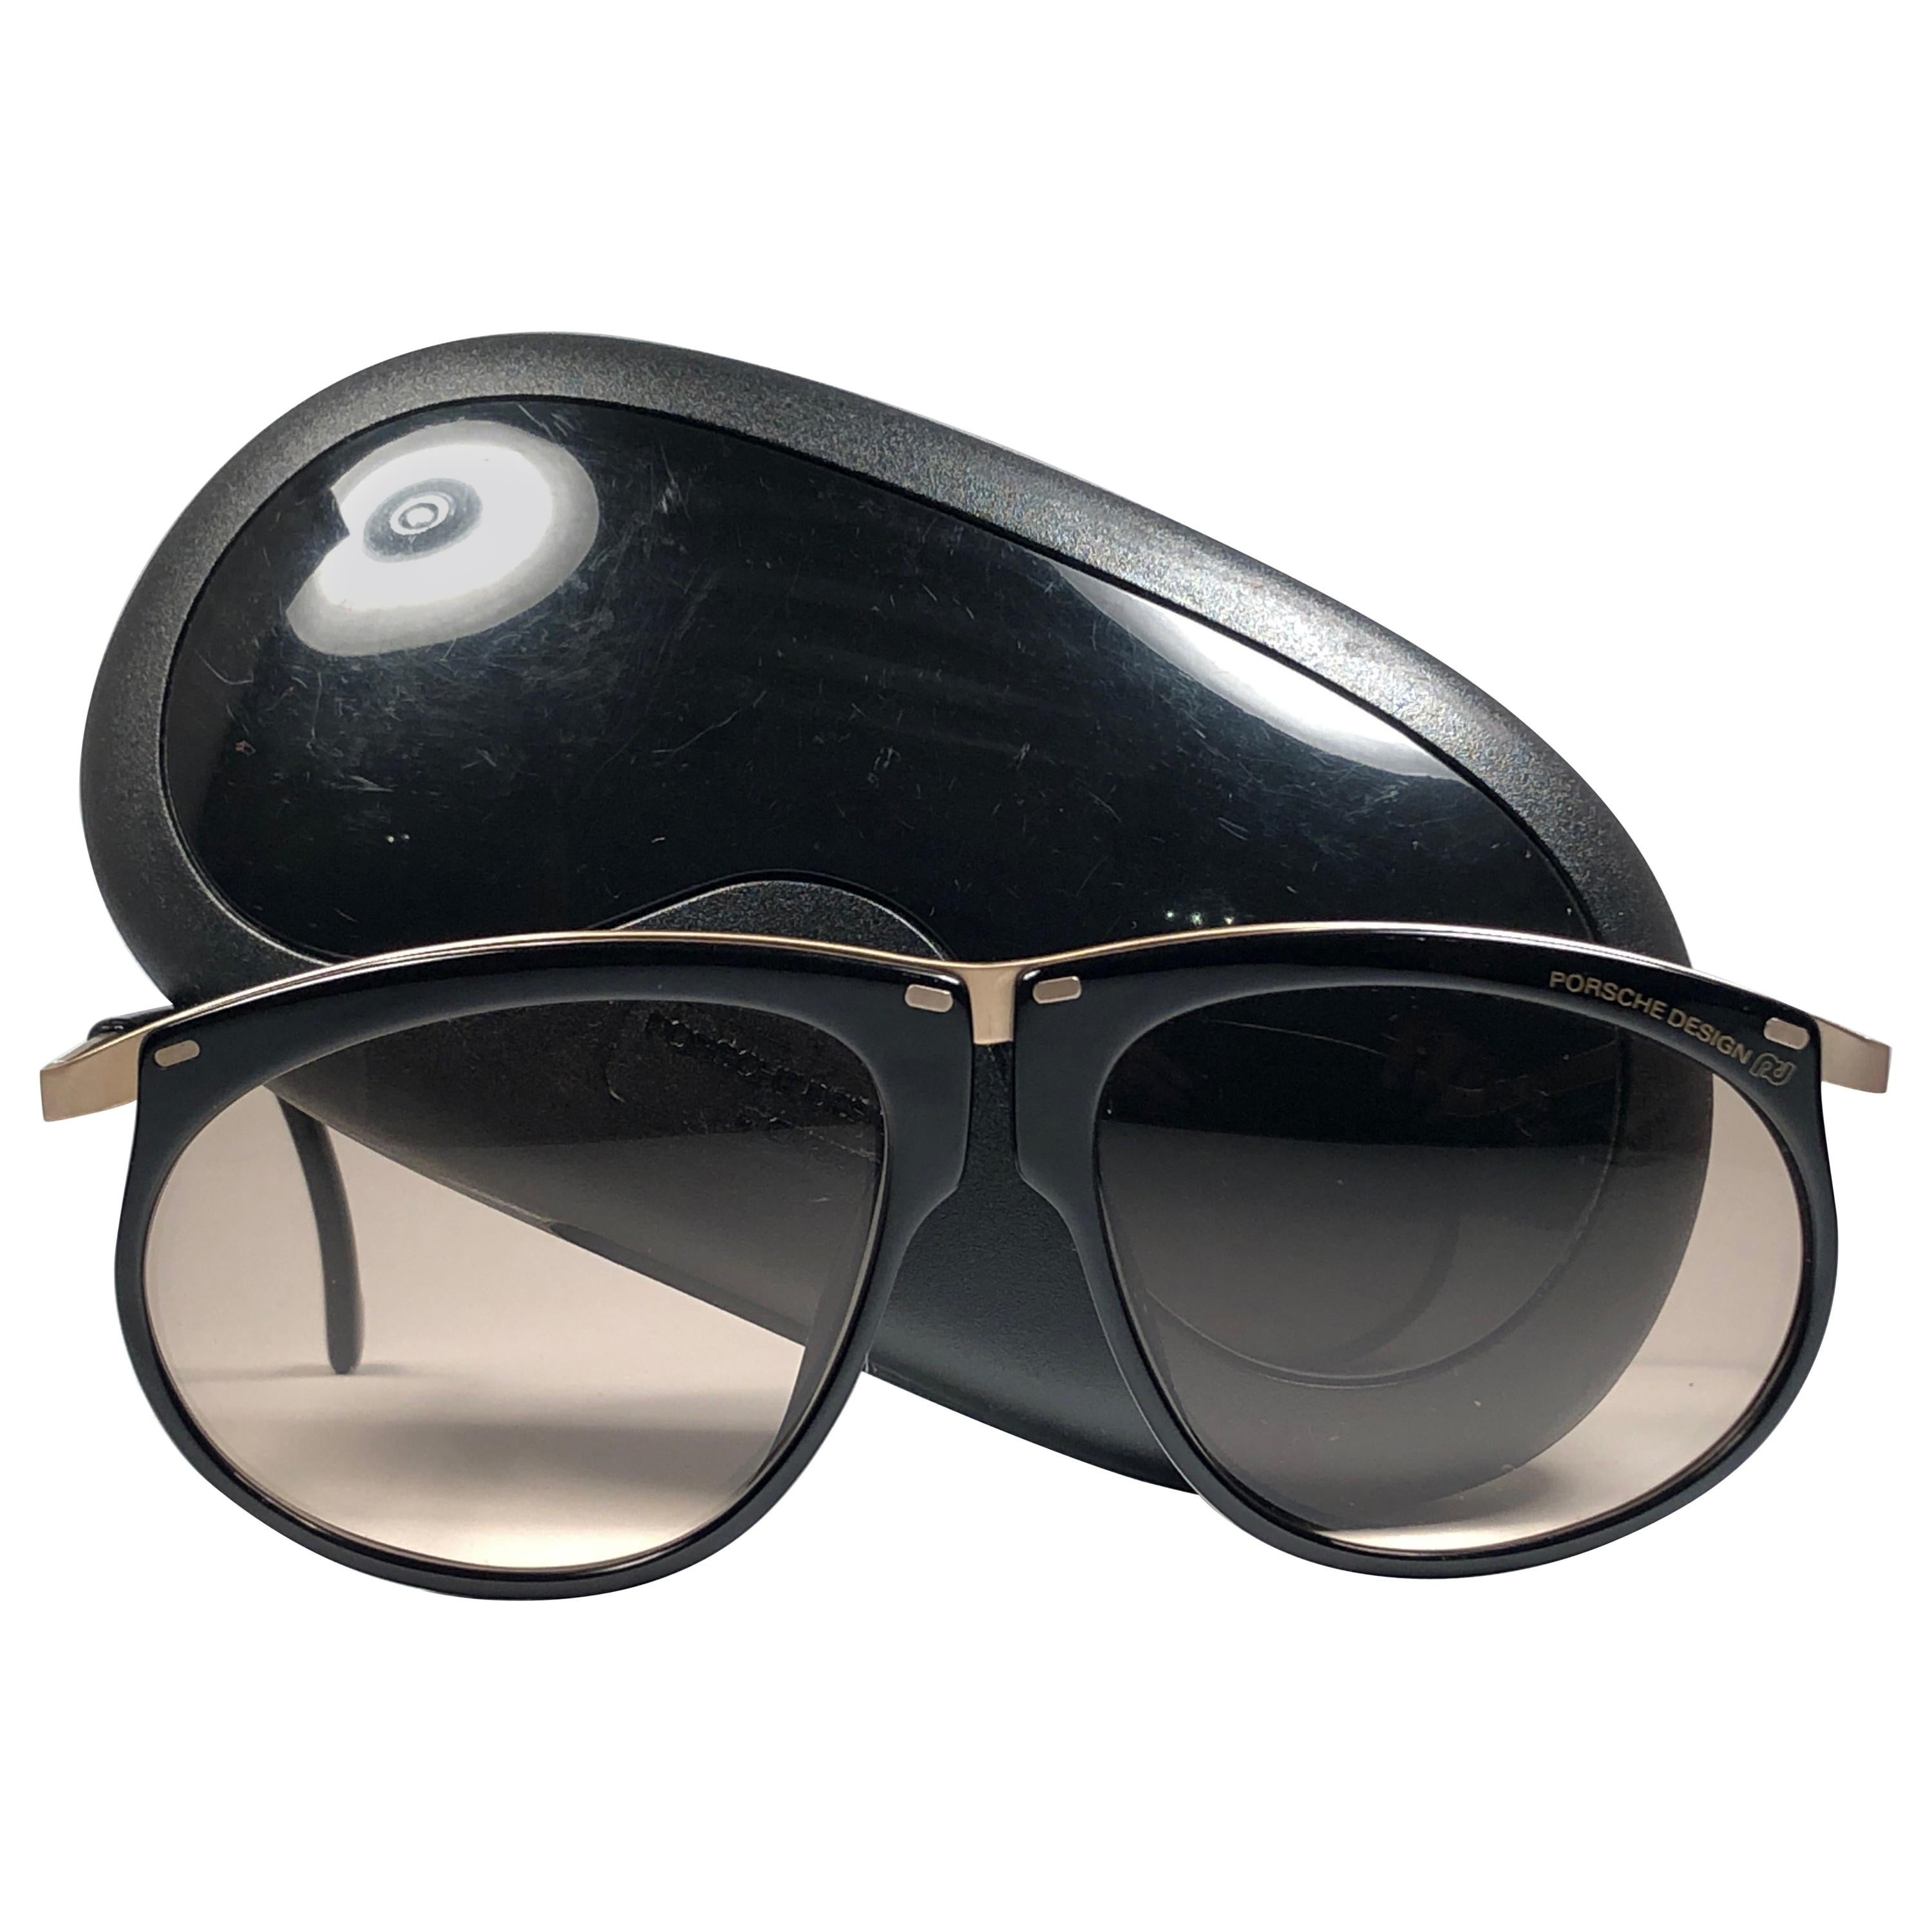 New Vintage Porsche Design By Carrera 5660 Black and Gold Sunglasses at ...